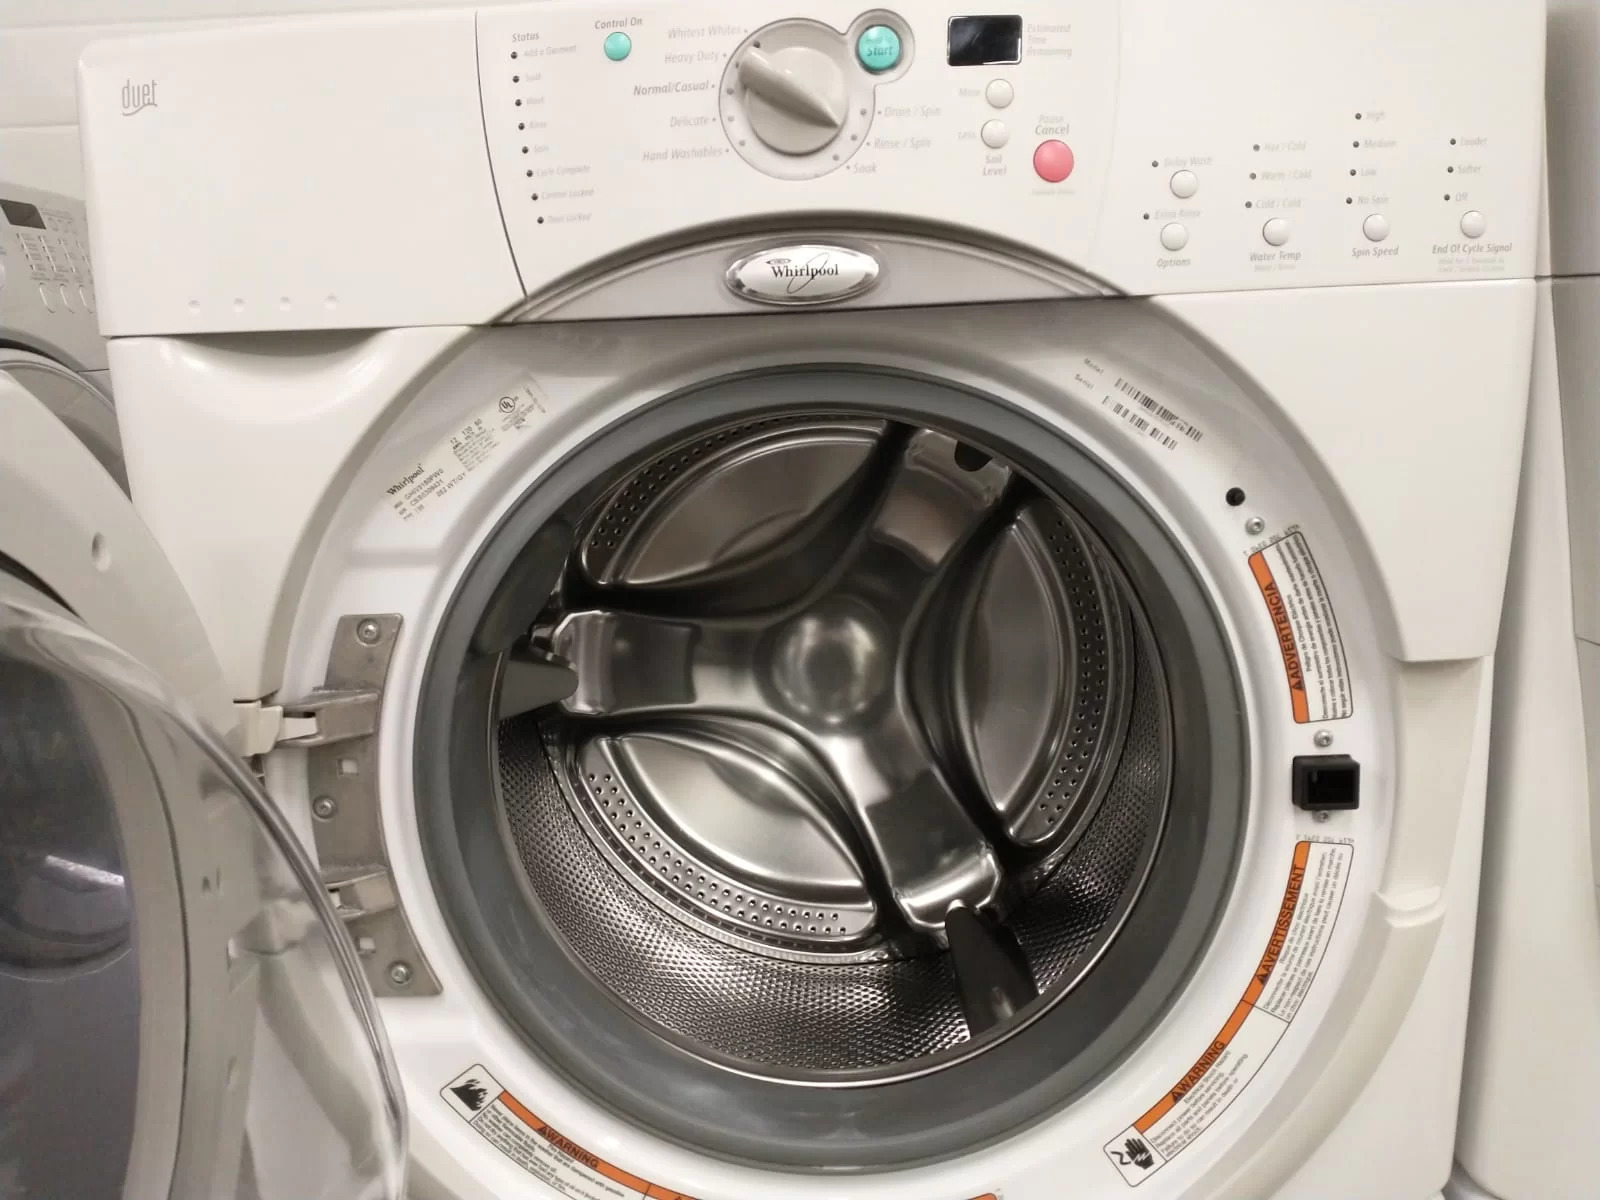 How To Fix The Error Code F15 For Whirlpool Washer